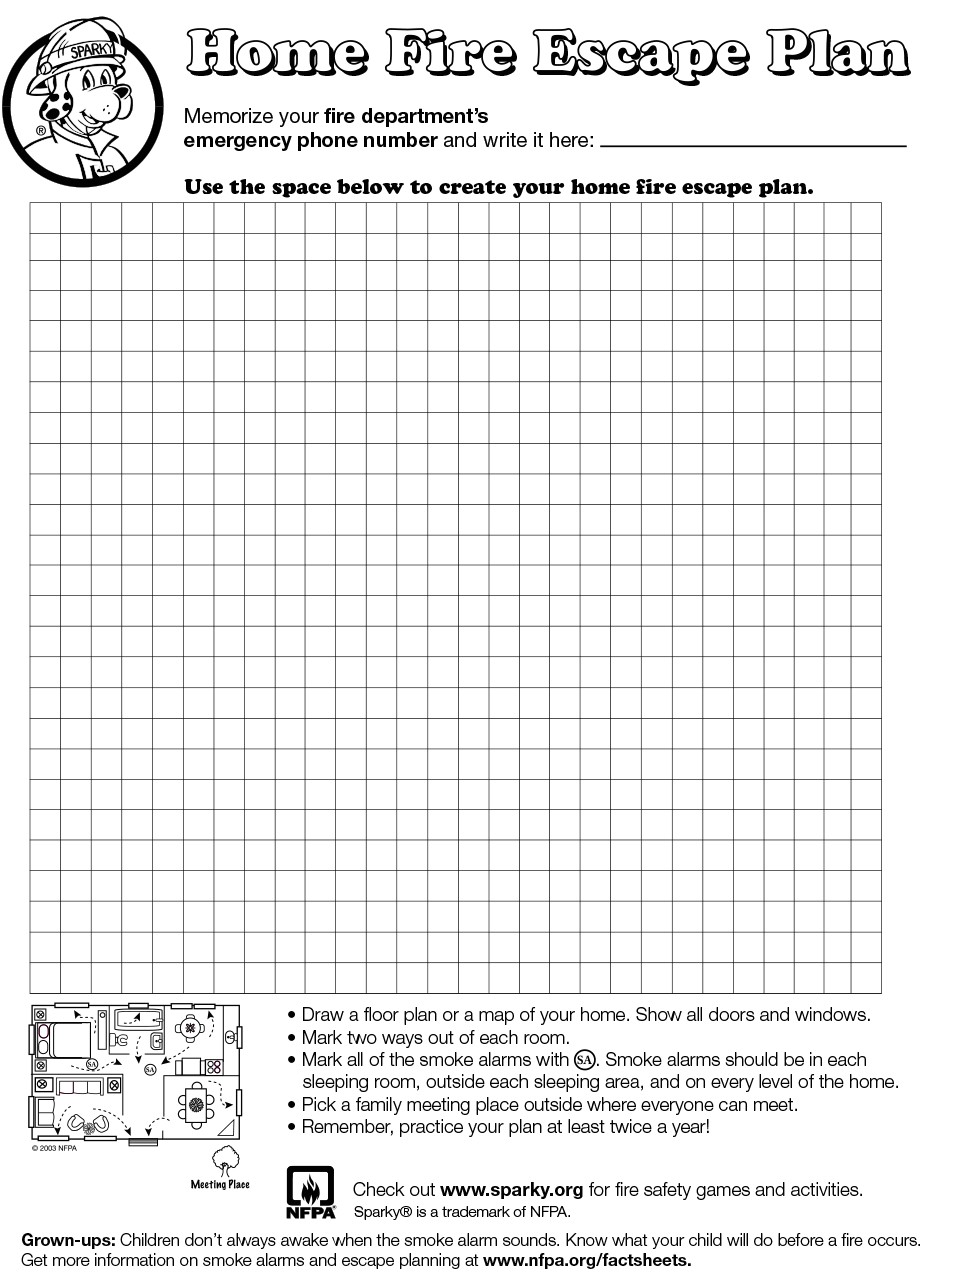 make your own home fire escape plan